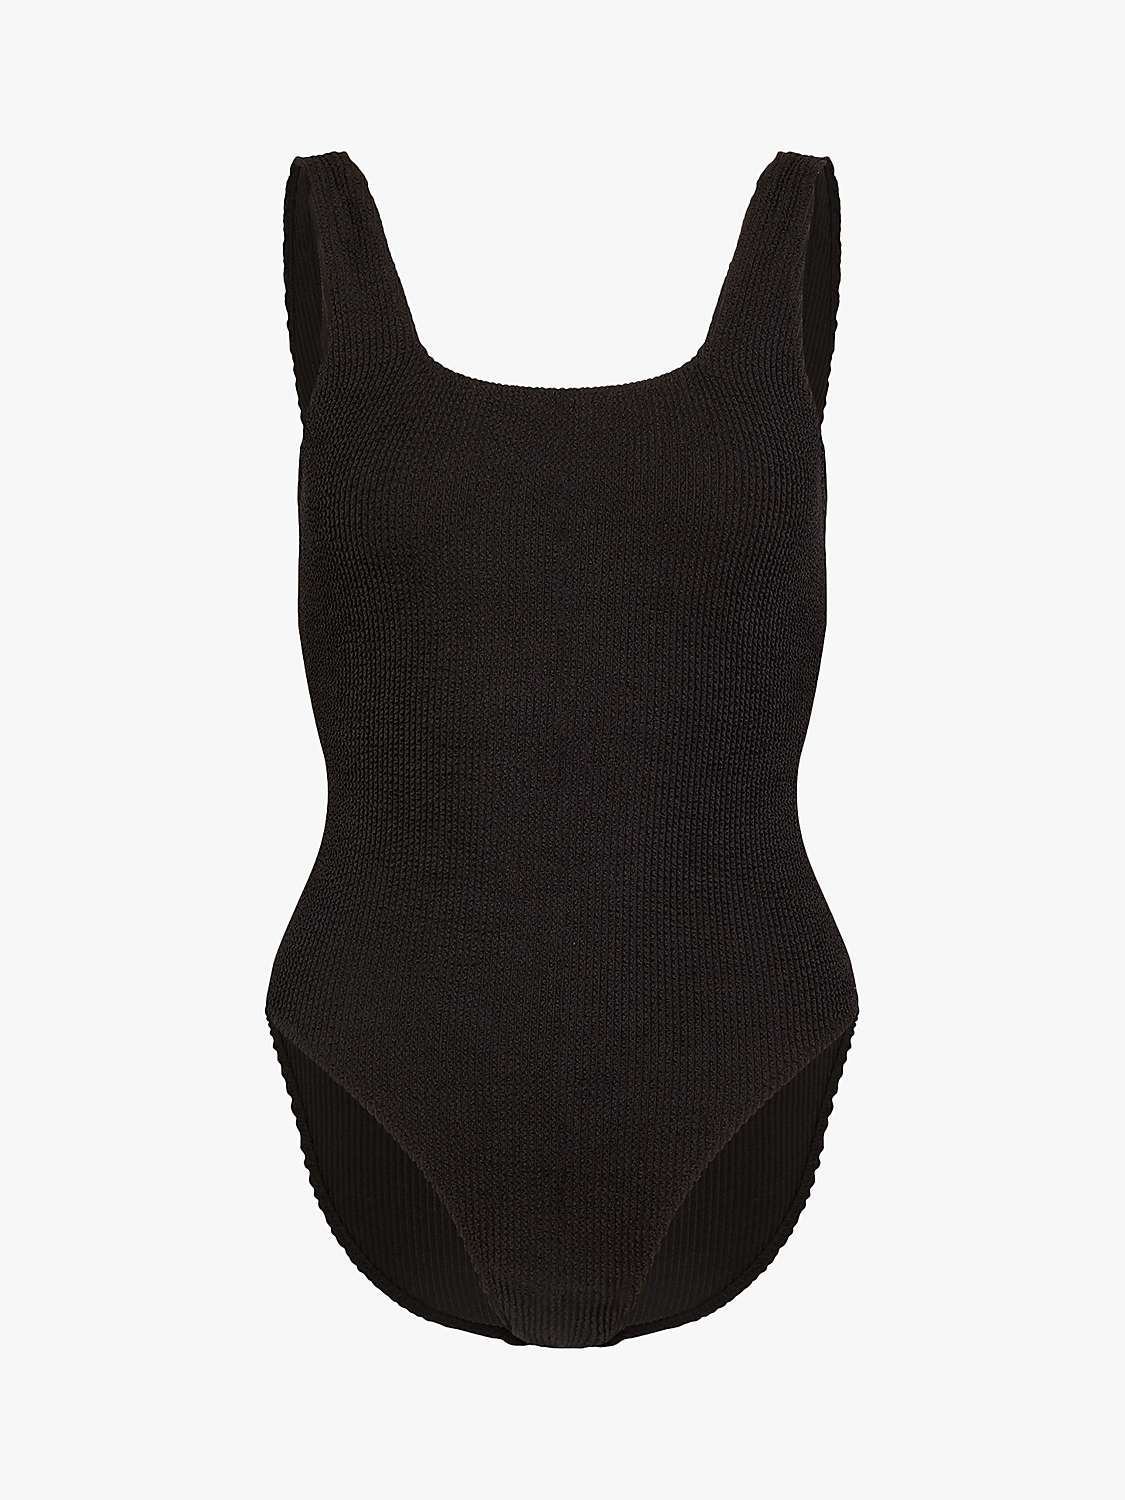 Buy Accessorize Crinkle Swimsuit Online at johnlewis.com